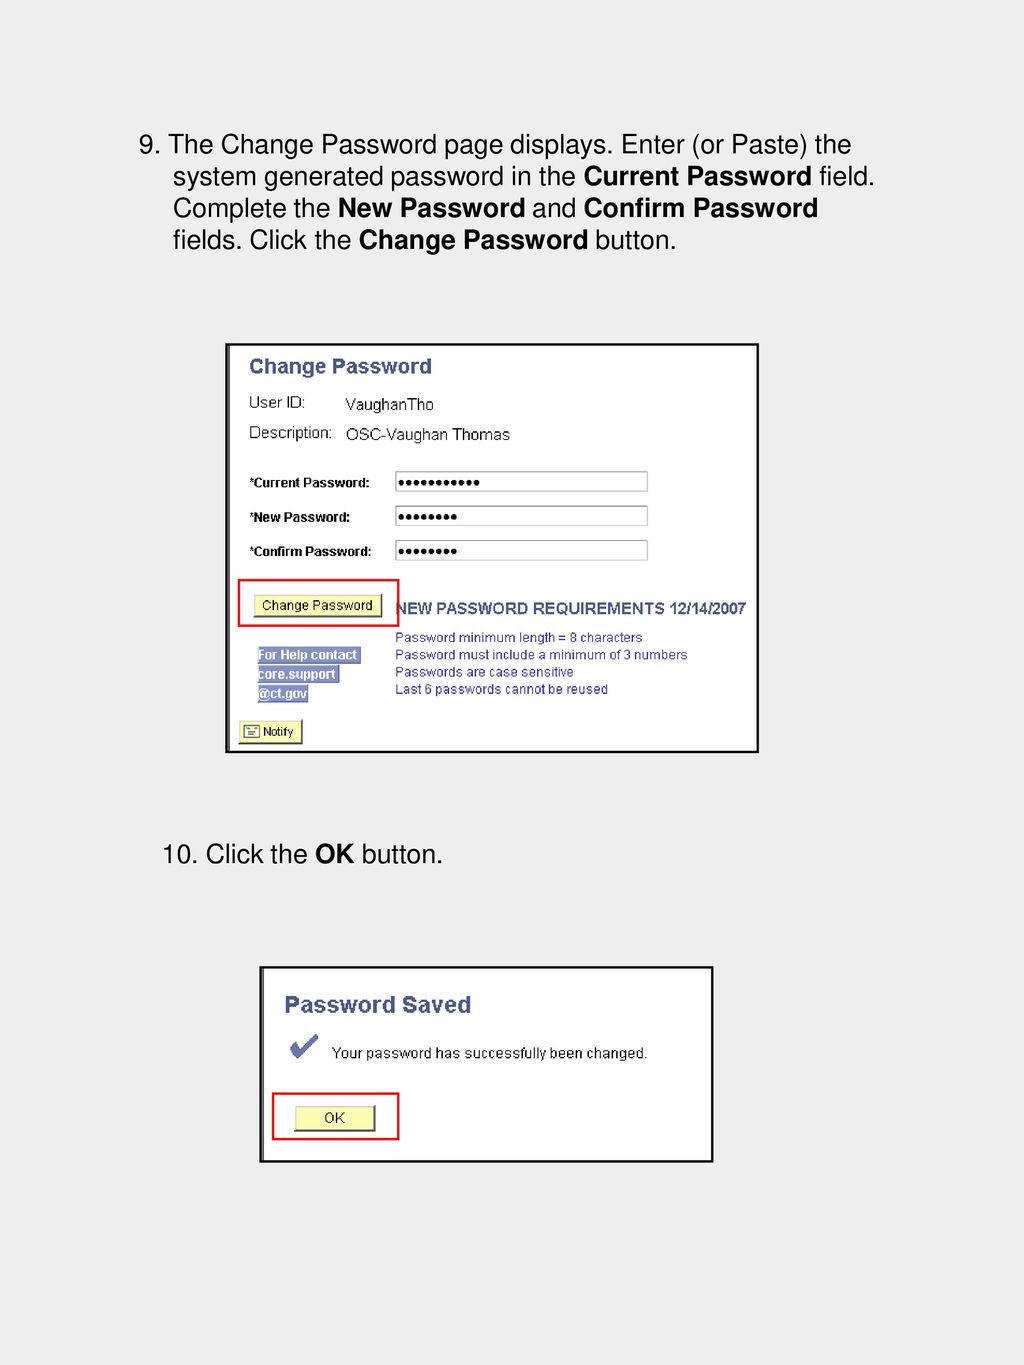 9. The Change Password page displays